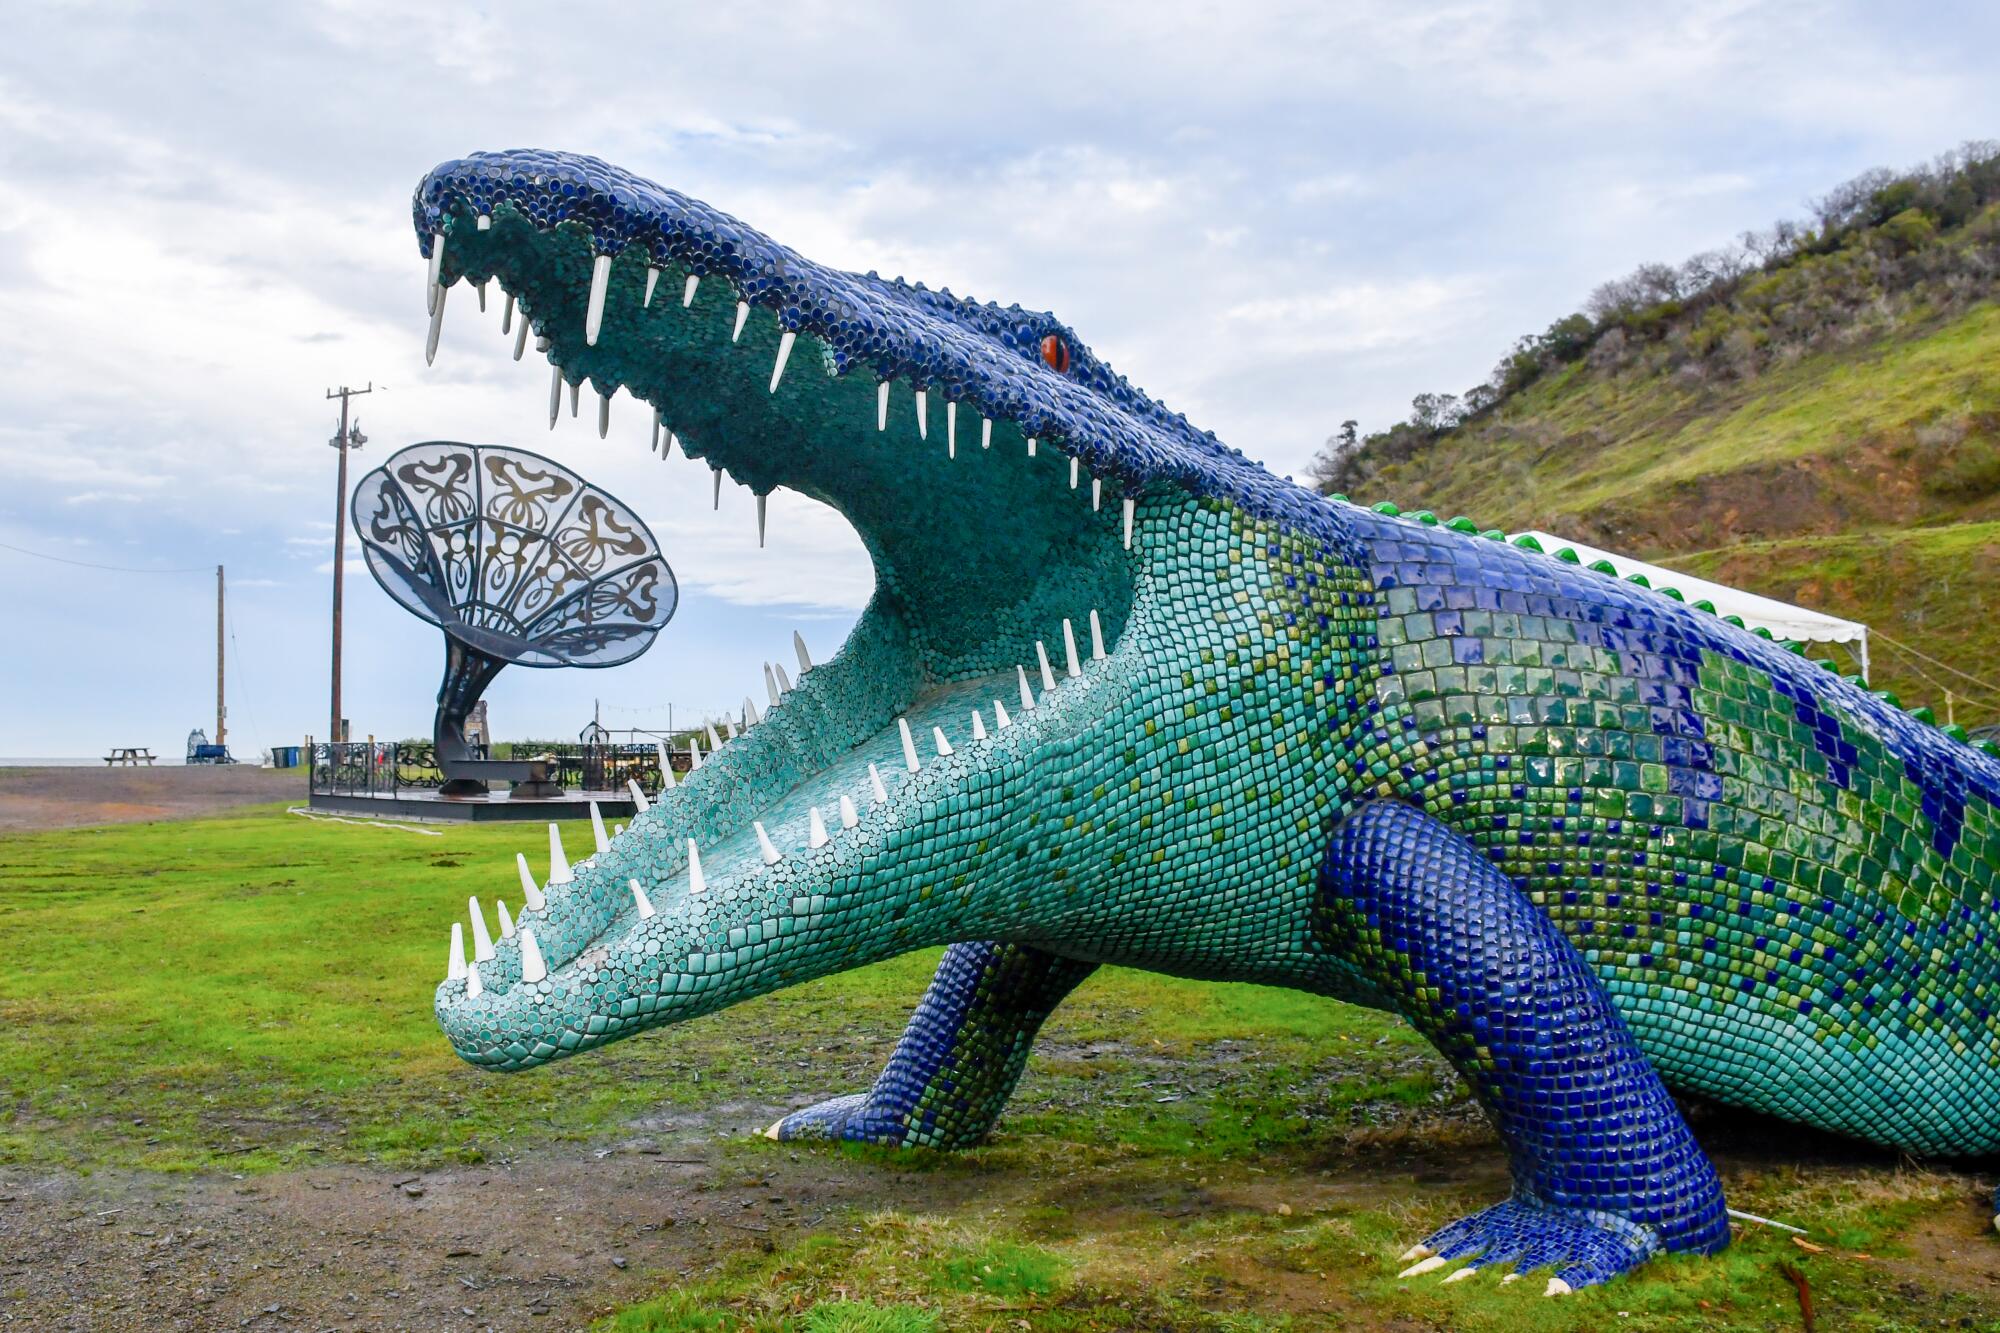 A blue and green mosaic-decorated crocodile statue, jaws open wide.